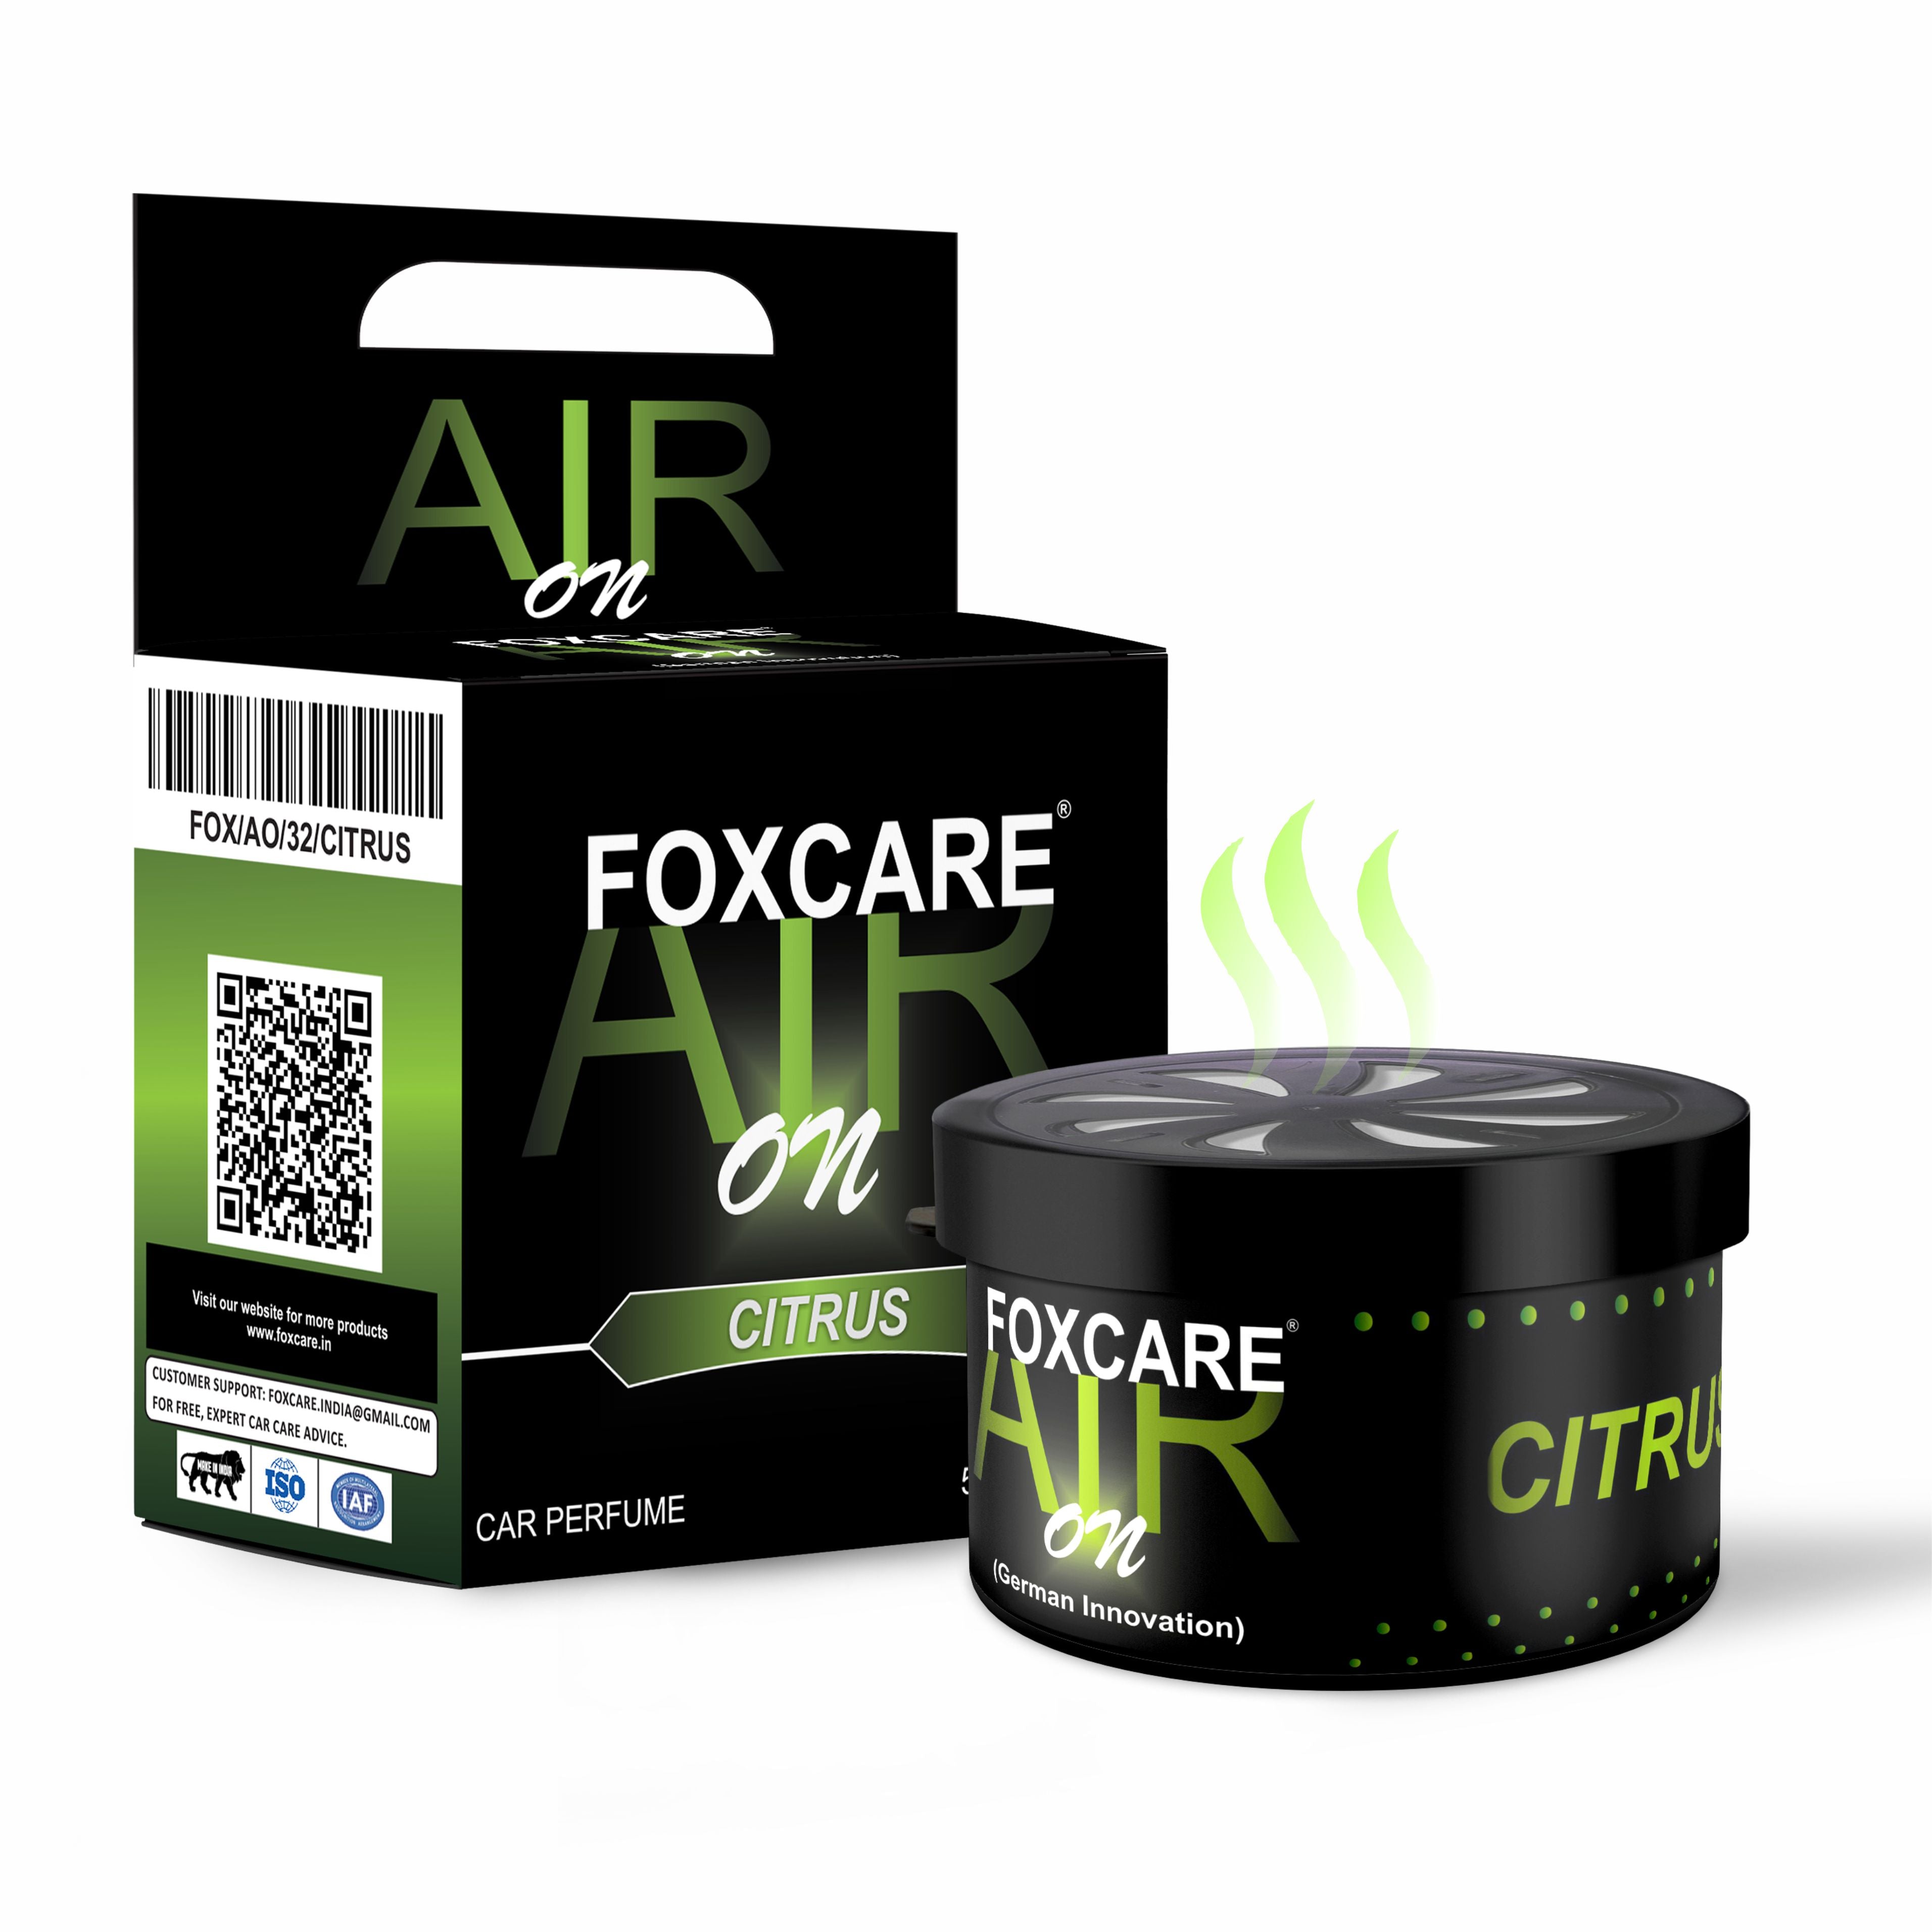 Foxcare Air On Citrus Organic Car Perfume Bar, Foxcare Air On Strong Fiber  Air Freshener to Freshen'up Your Car | 50 g Car Accessories interior car